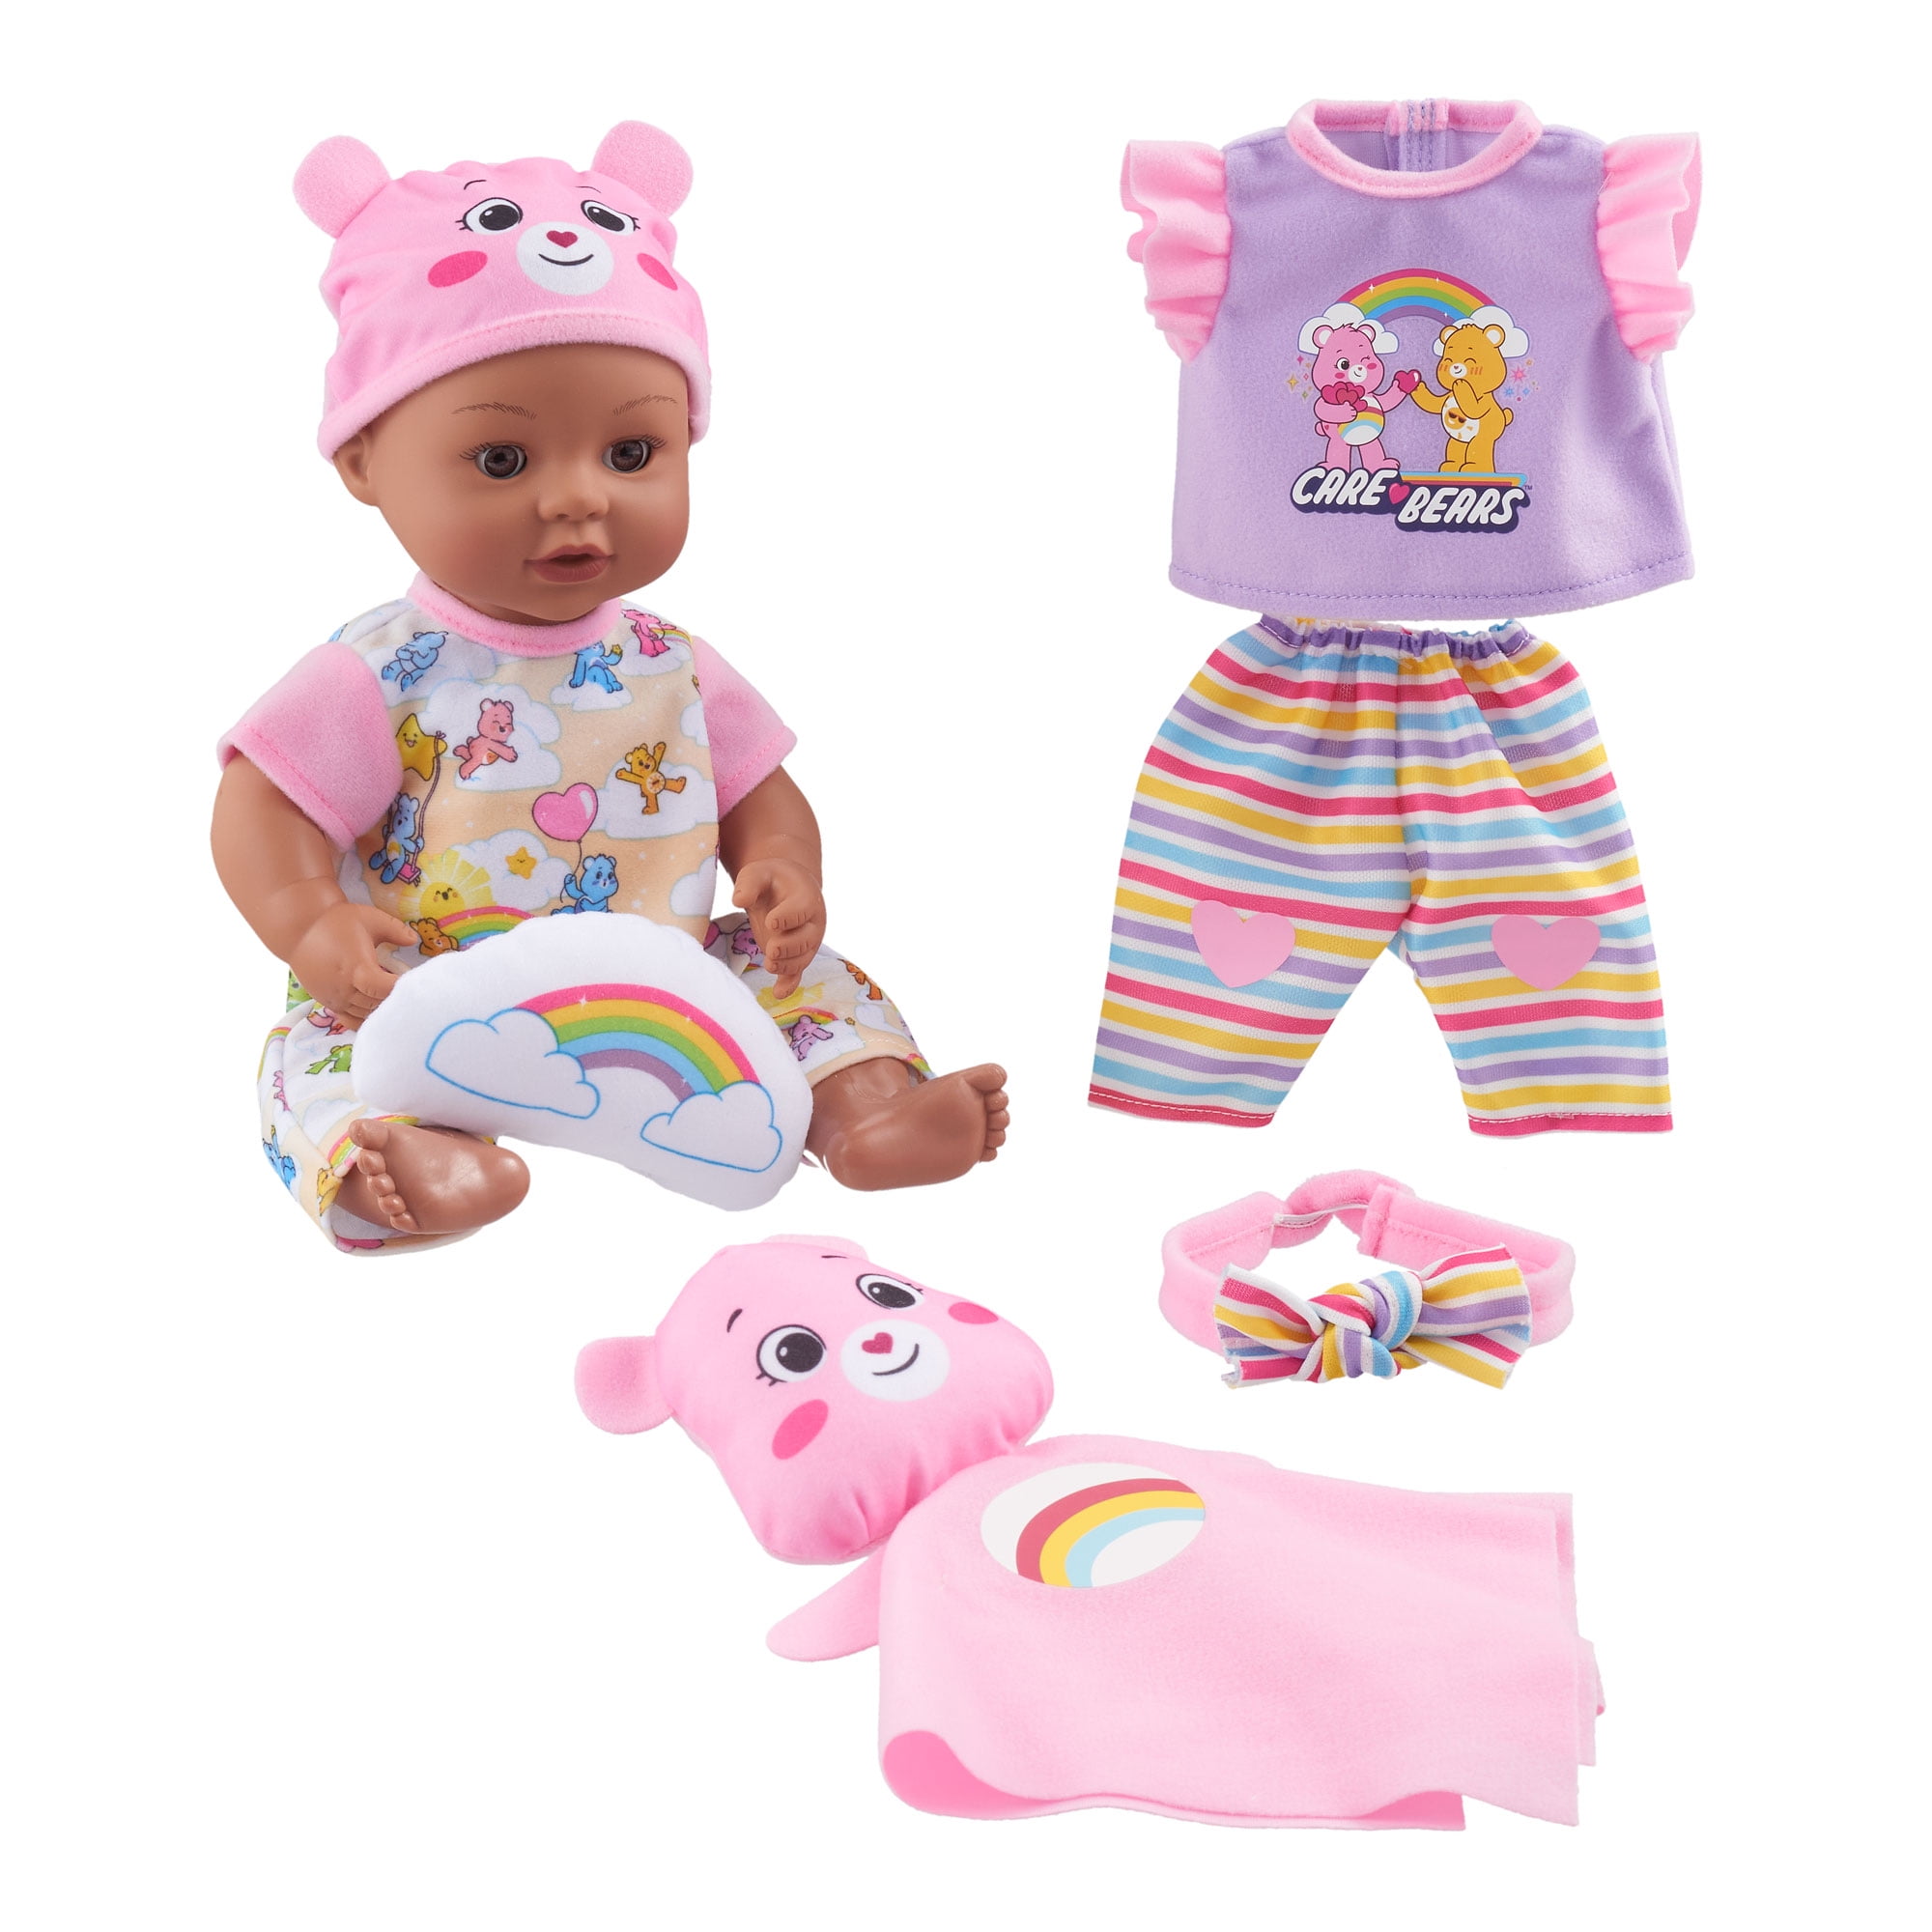 My Sweet Baby Doll Care Set Clothing Bath Time Feeding Accessories 12 Inch Toy 